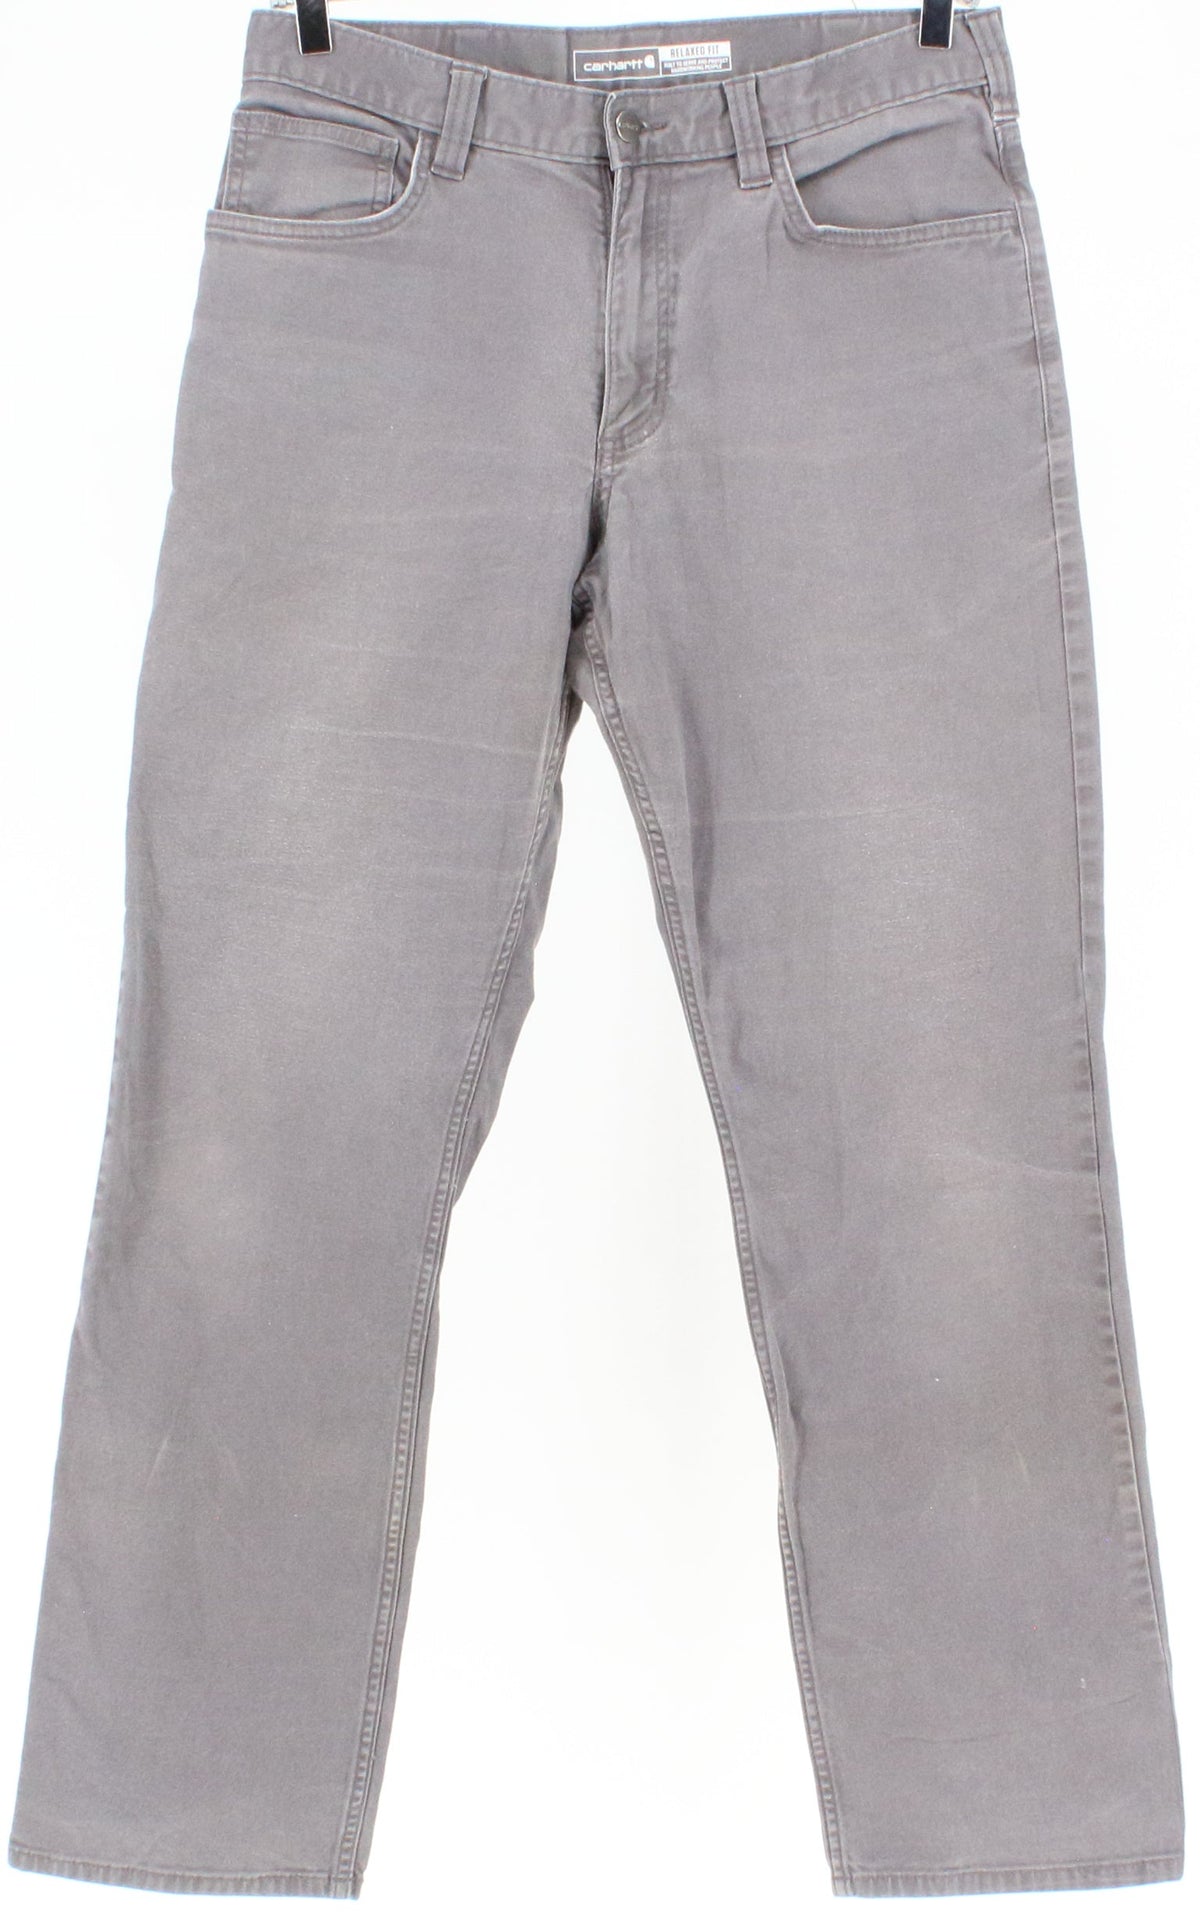 Carhartt Rugged Flex Relaxed Fit Grey Canvas 5-Pocket Work Pants